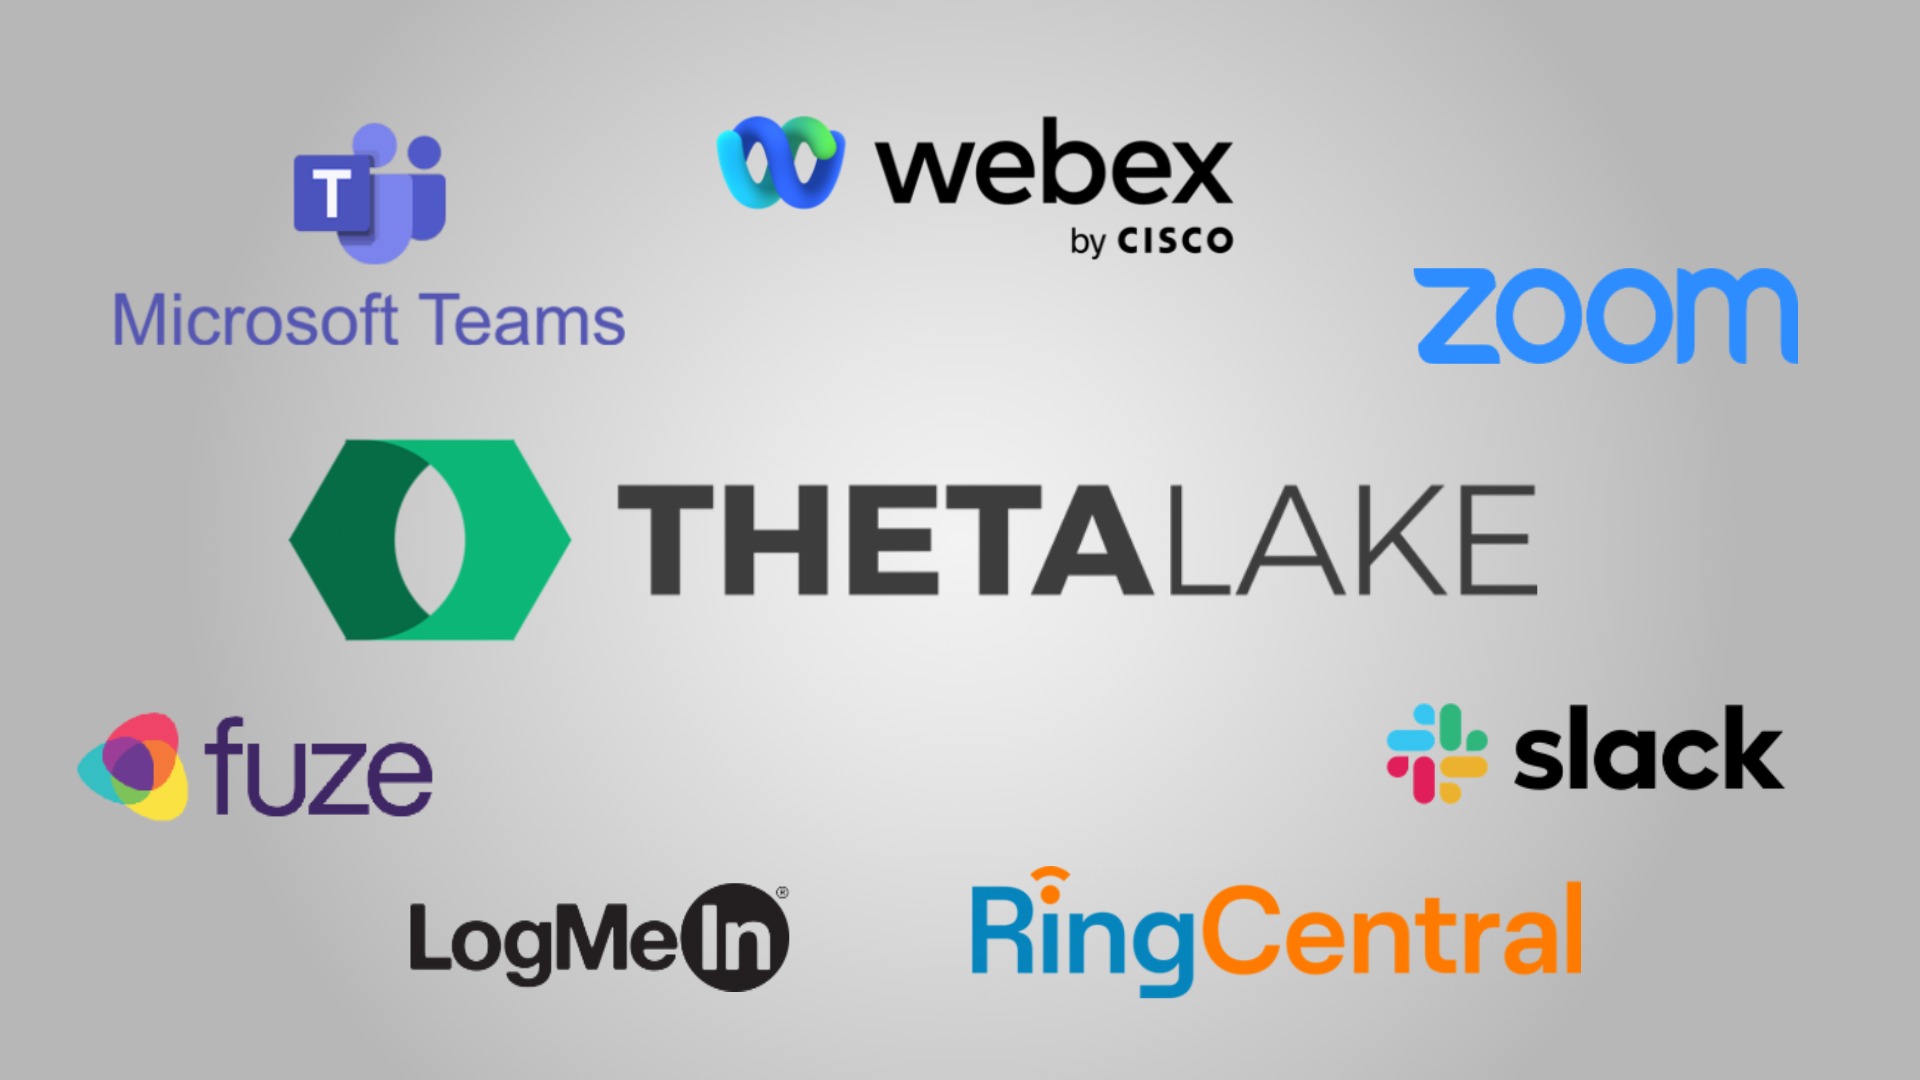 Theta Lake integrates with Microsoft Teams, Webex, Zoom, Slack, RingCentral, LogMeIn, Fuze, and more